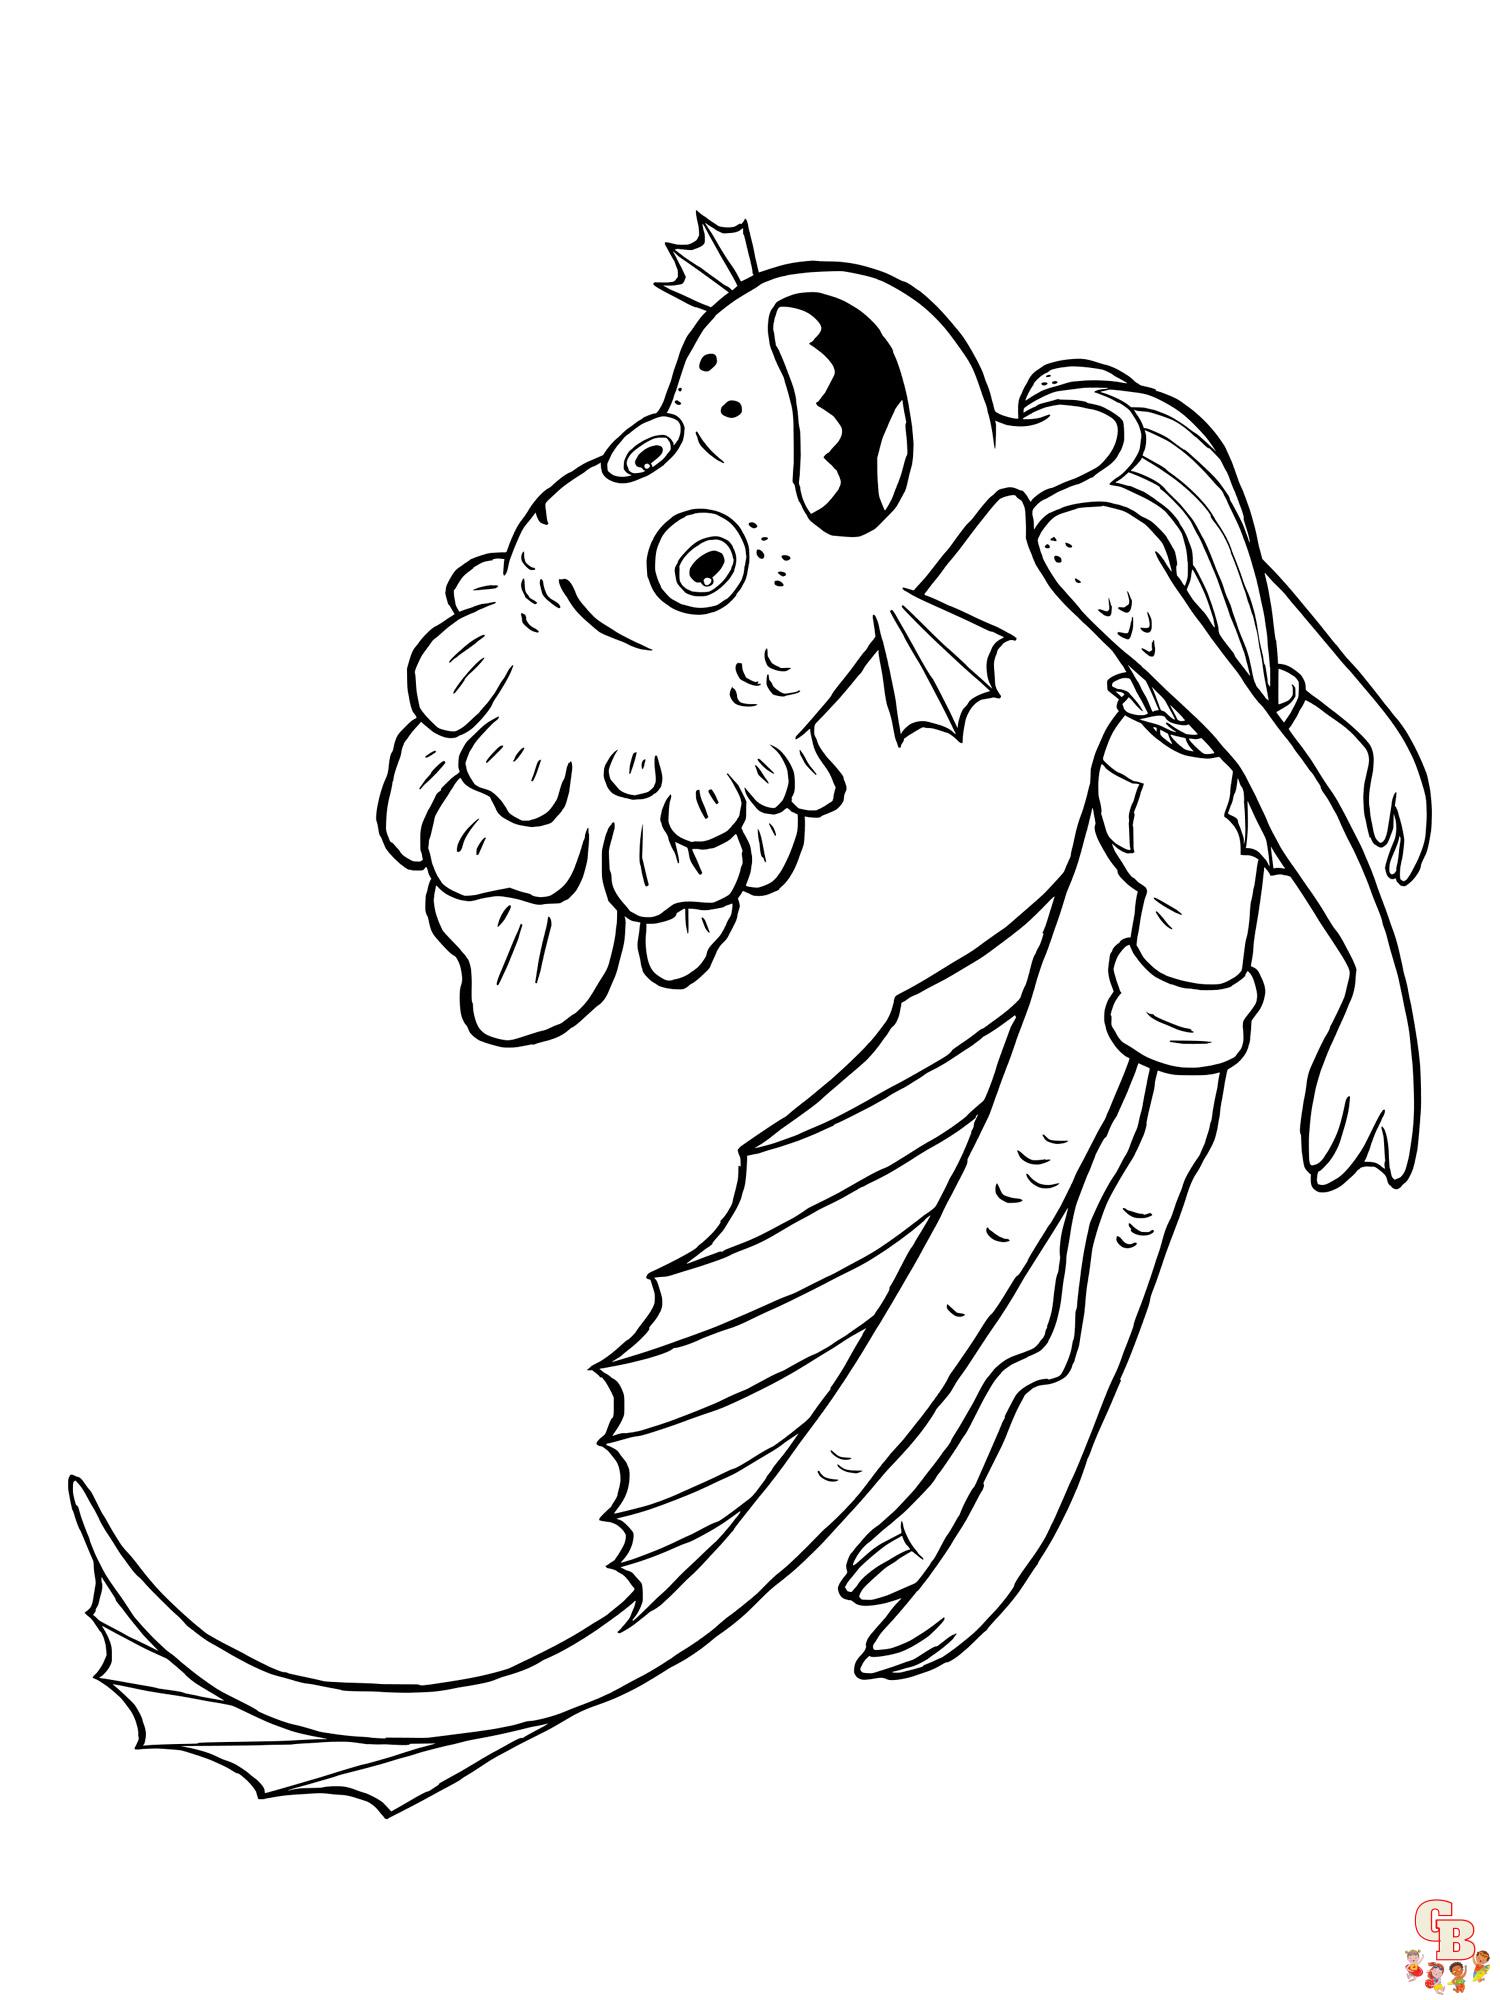 Luca Coloring Pages 20